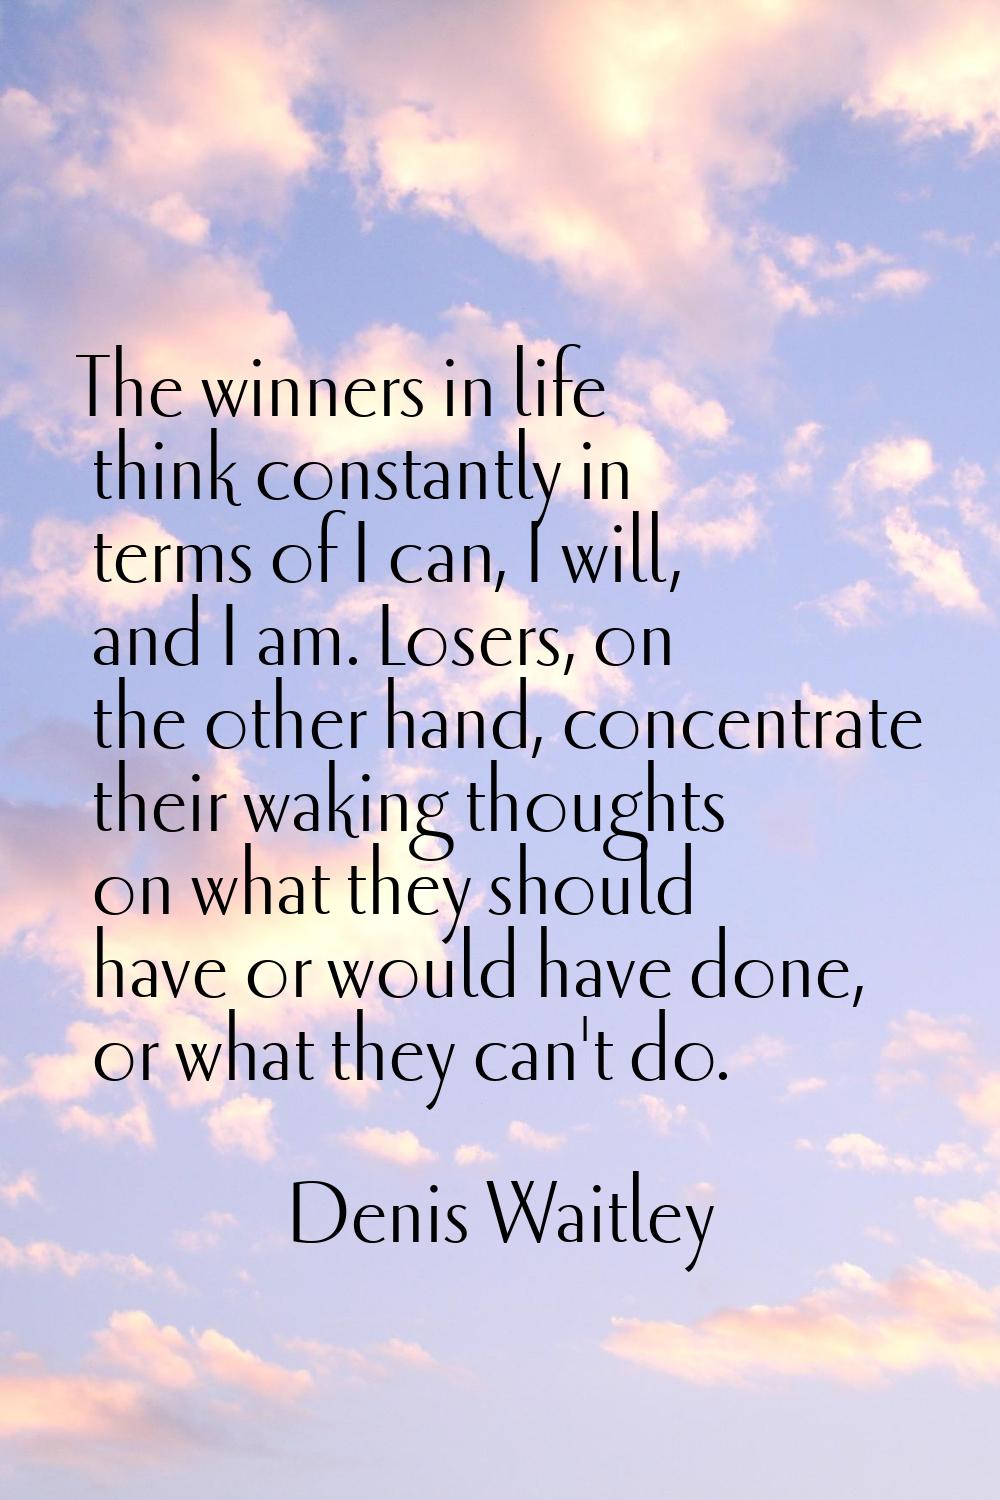 The winners in life think constantly in terms of I can, I will, and I am. Losers, on the other hand